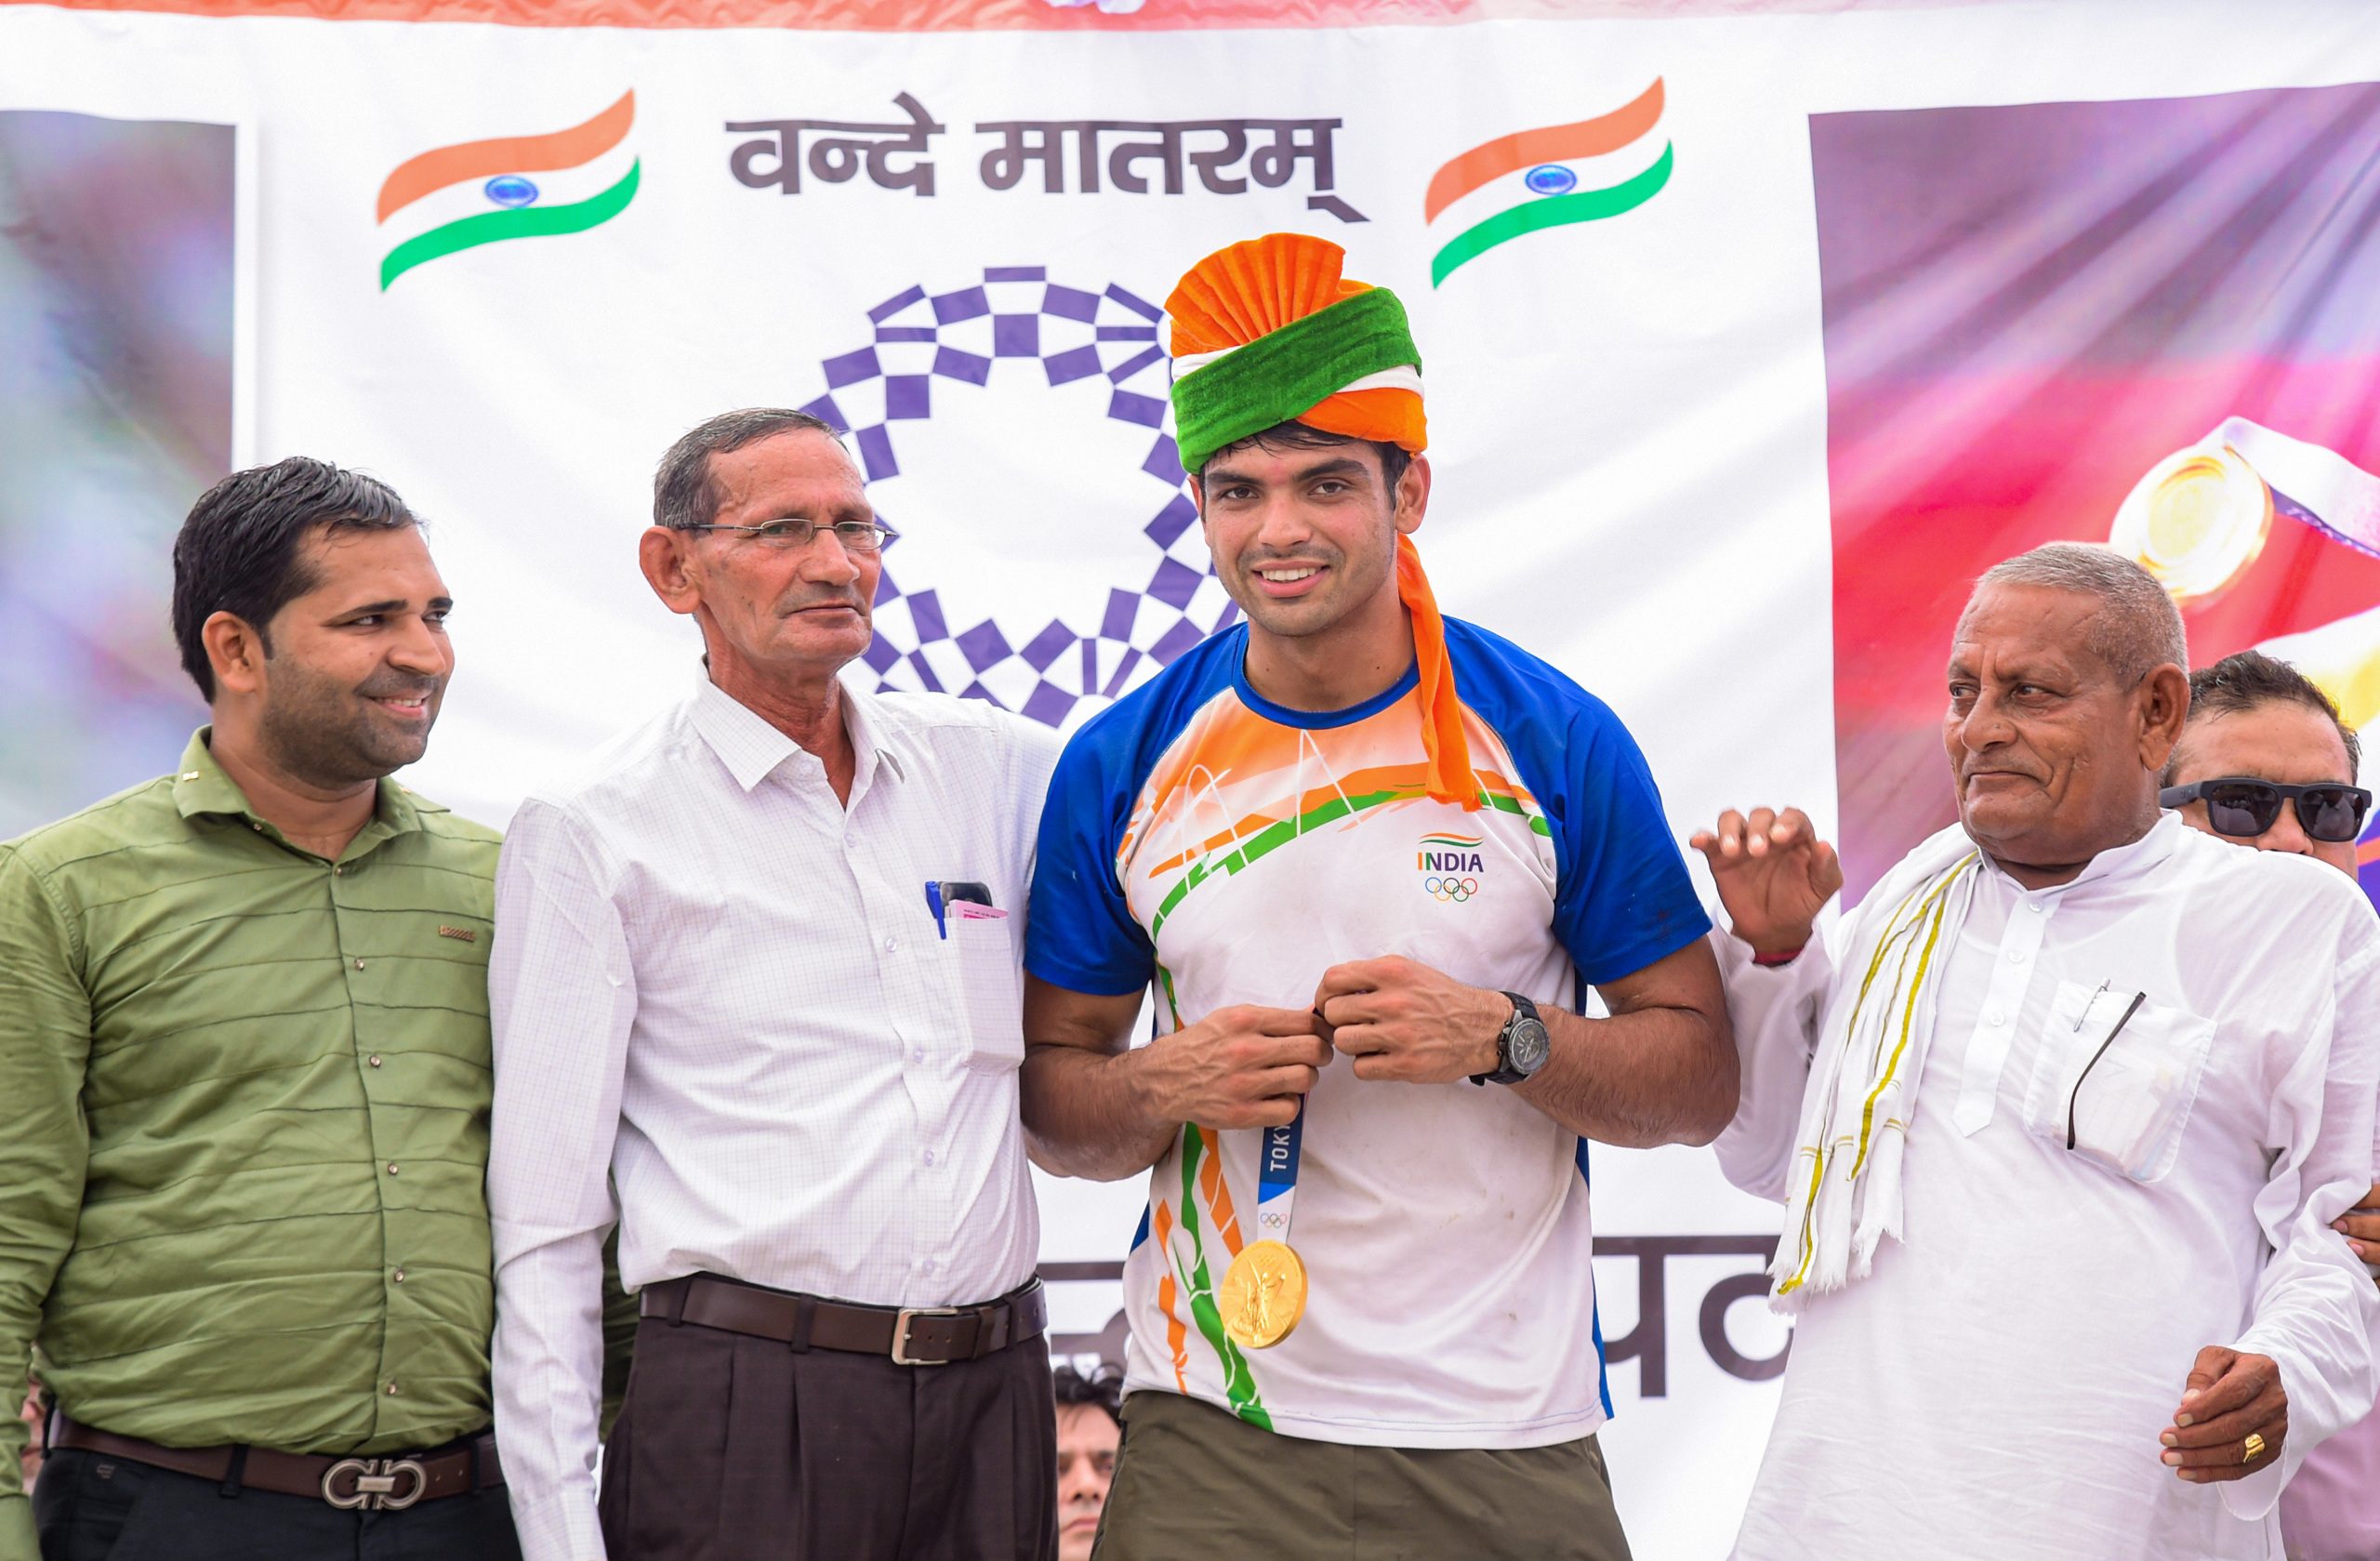 Gold medallist Neeraj Chopra leaves welcome ceremony due to fever